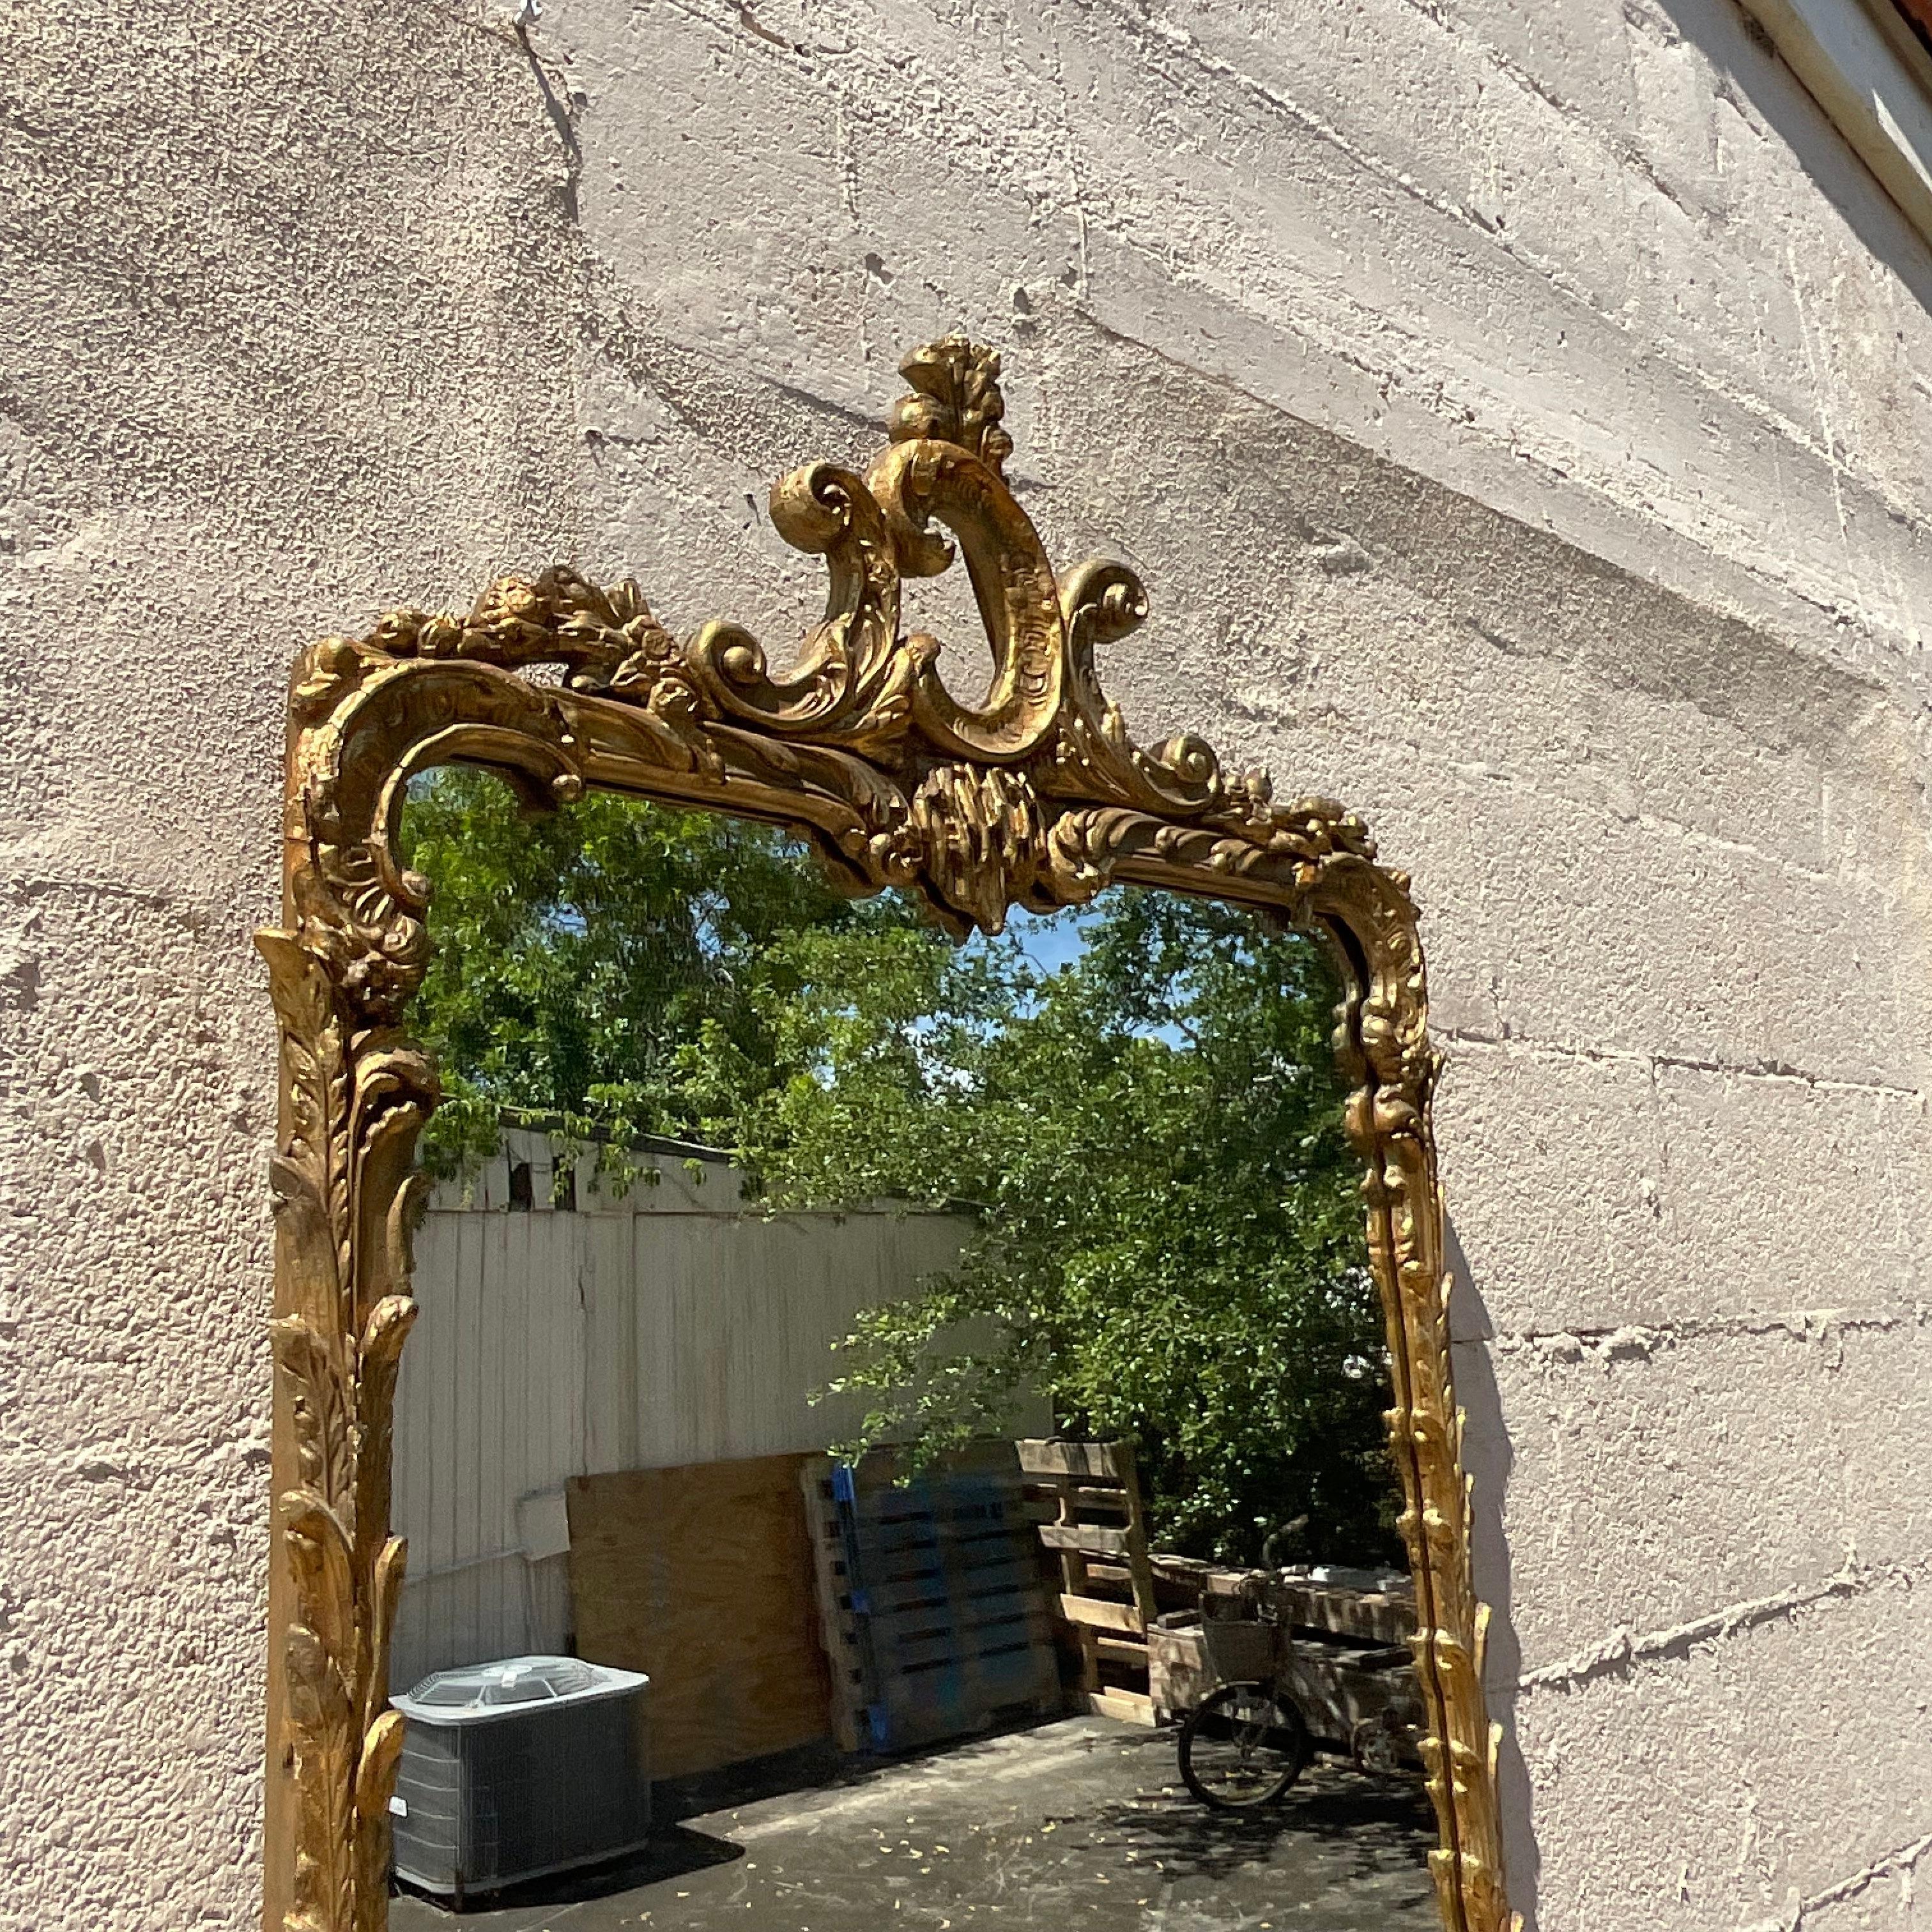 Experience timeless elegance with our Vintage Regency Gilt Mirror. American-crafted, this mirror features a luxurious gilt frame, blending classic Regency style with refined glamour for a sophisticated and opulent accent that elevates any room.